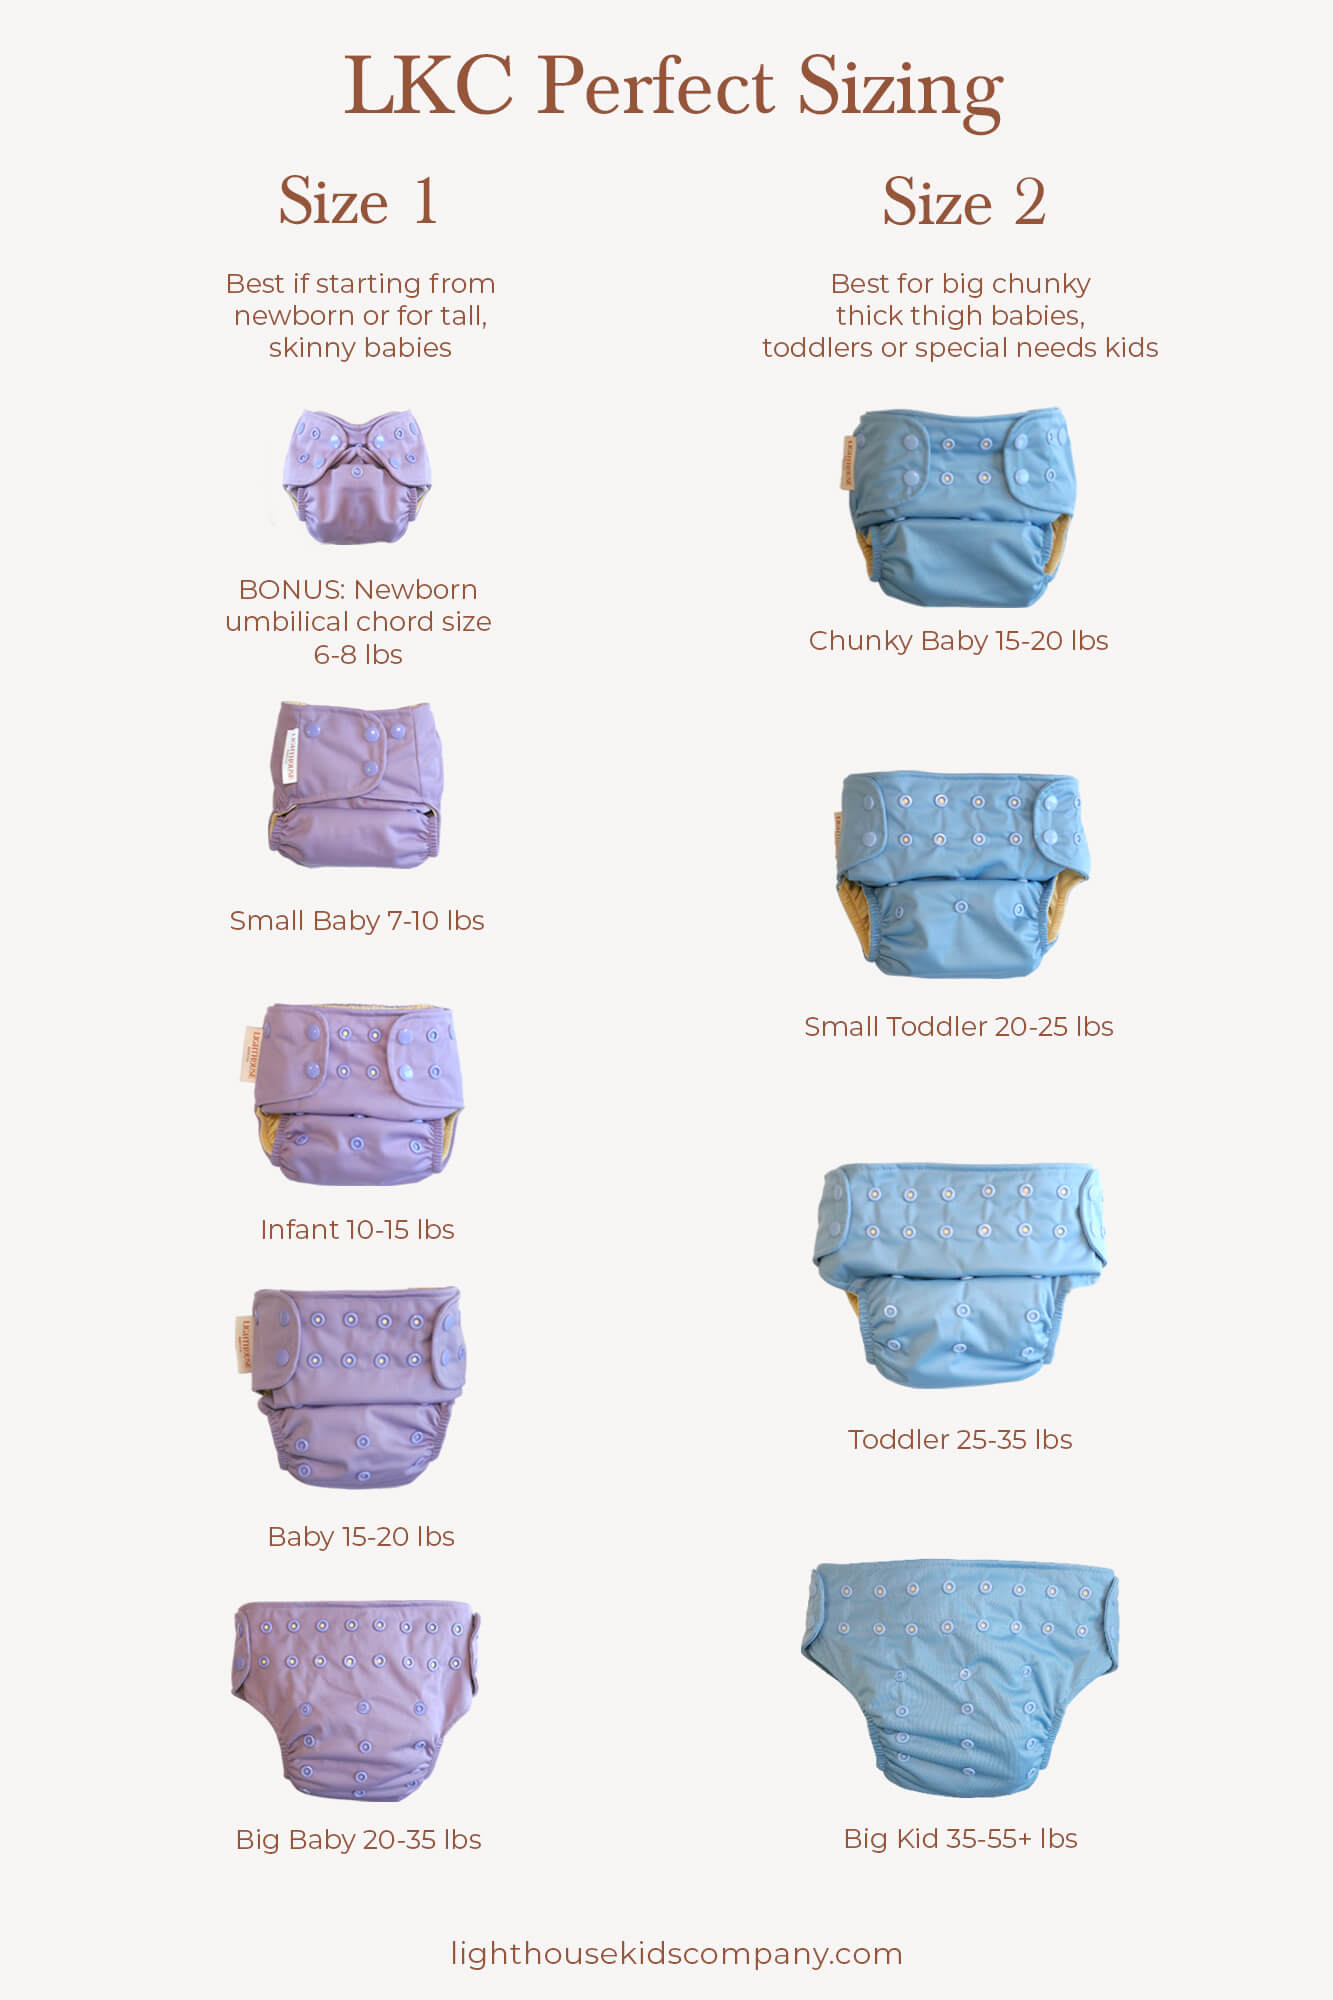 All-In-One Cloth Diaper - Creambrulle